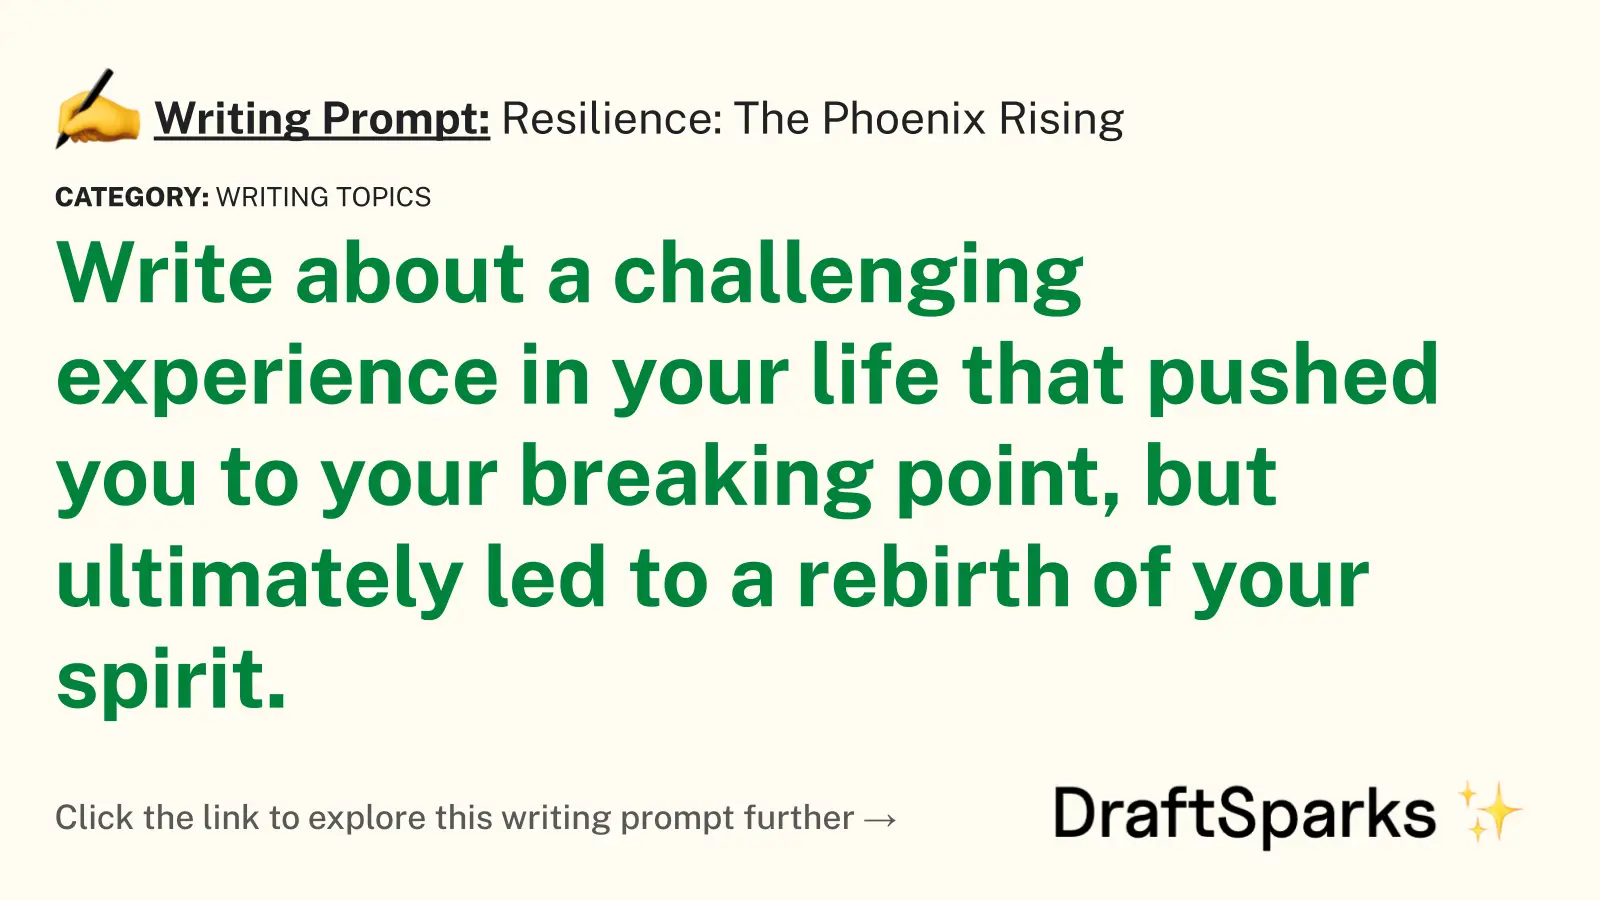 Resilience: The Phoenix Rising